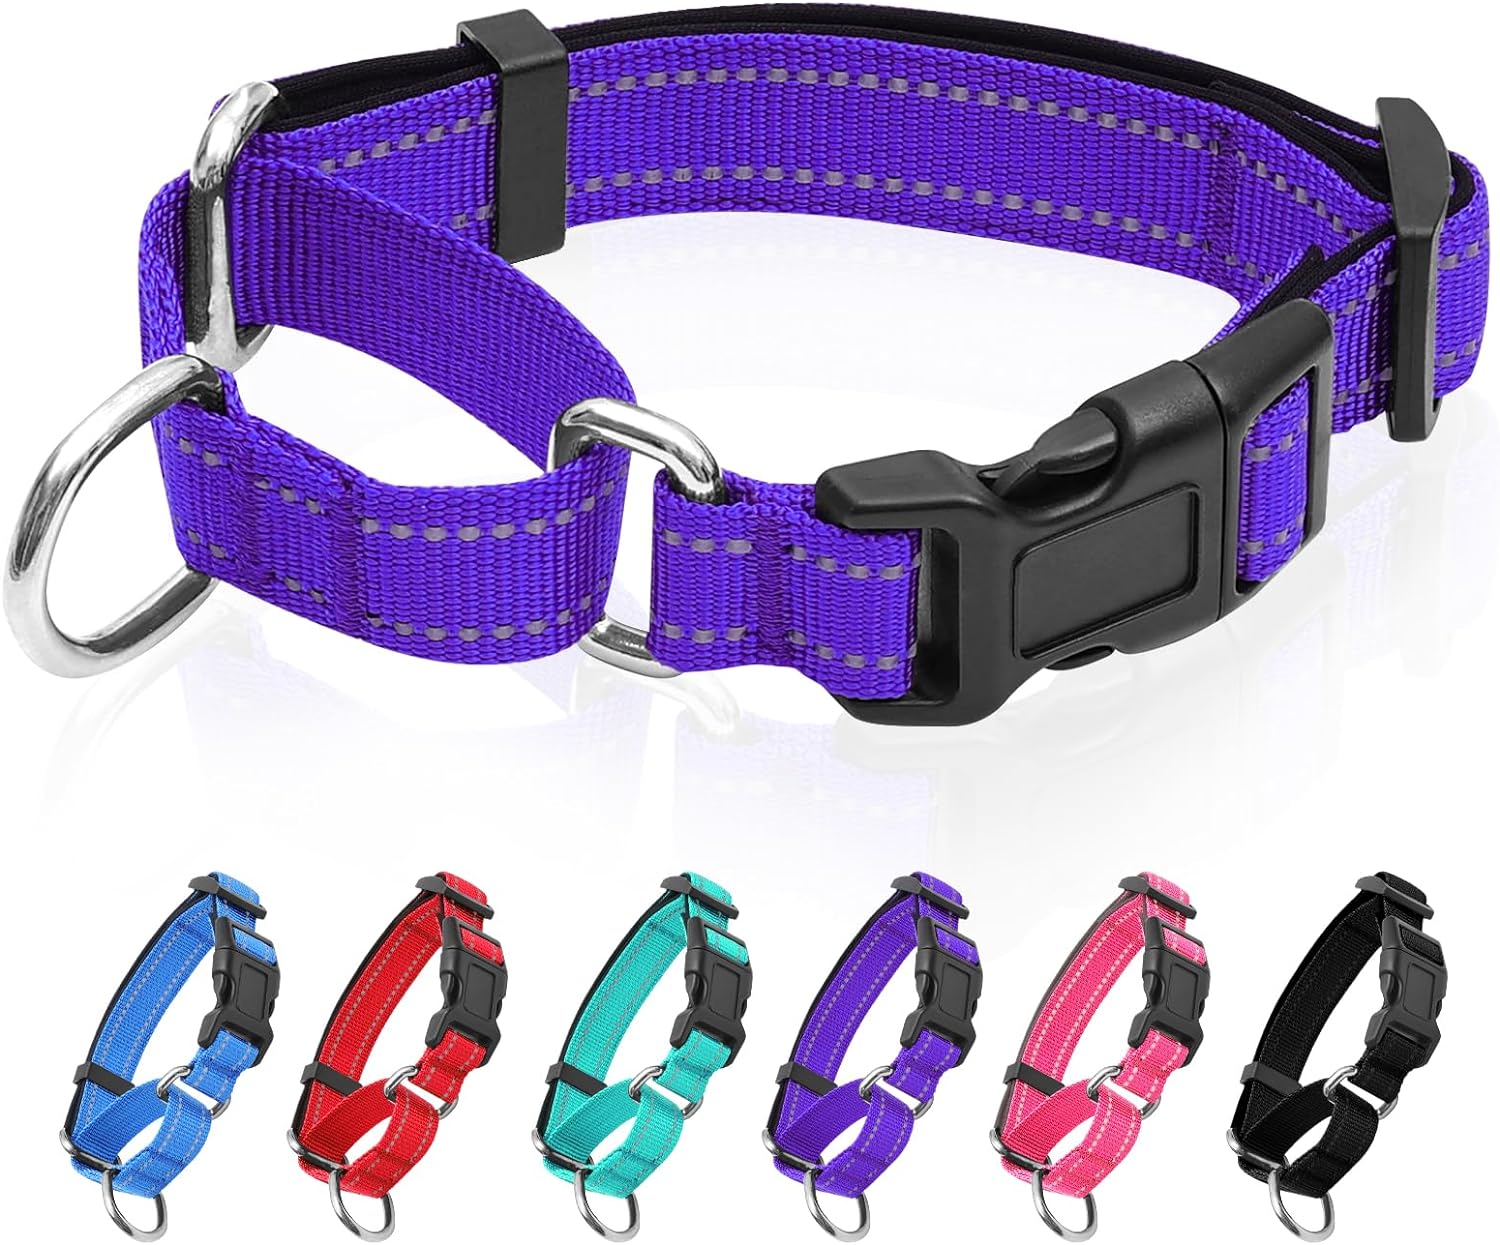 Reflective Martingale Dog Collars. Dog Collar with Quick Release Buckle. Adjustable Soft Padded Breathable Nylon Pet Collar Suitable for Puppies for Small Medium Large Dogs.